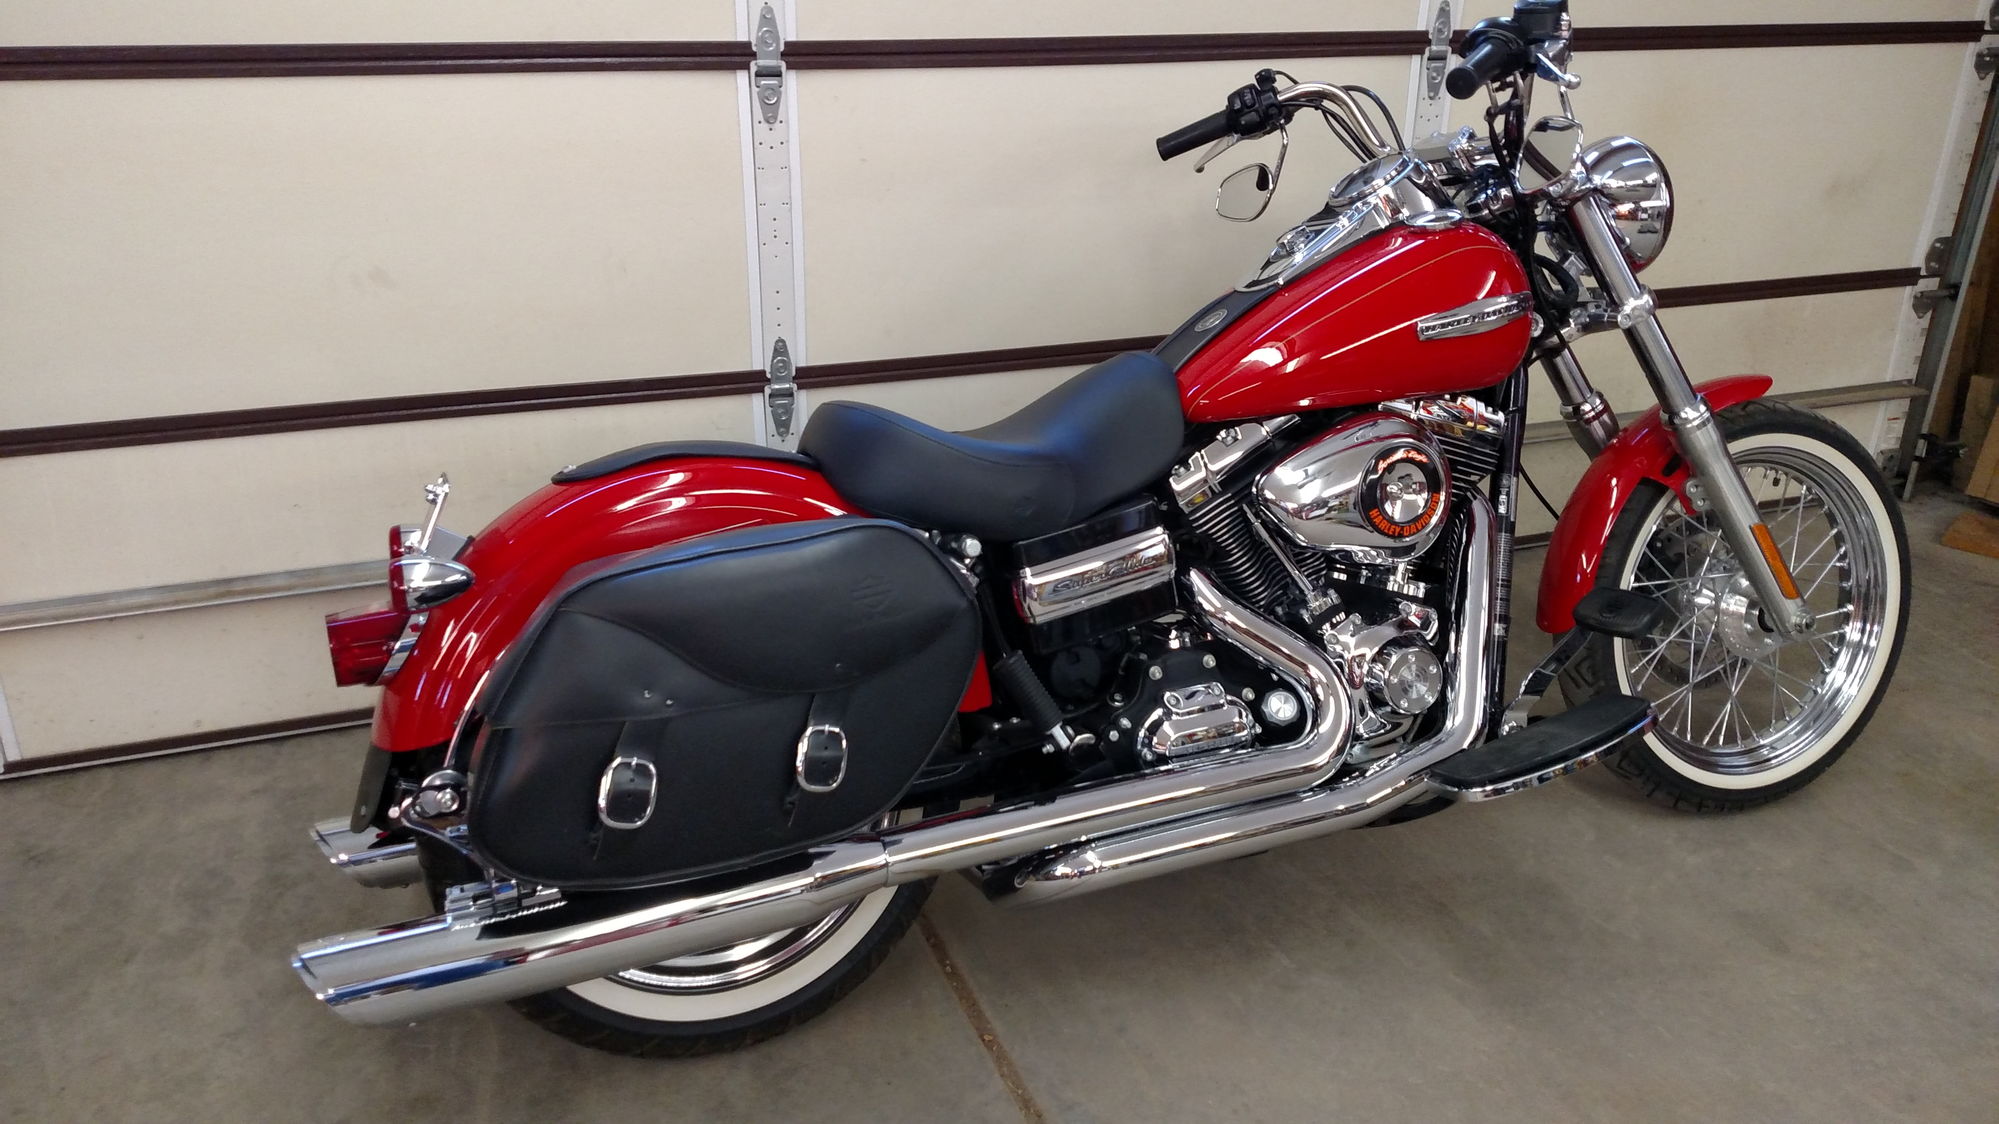 Switchback Dual Exhaust on my FXDC - Harley Davidson Forums